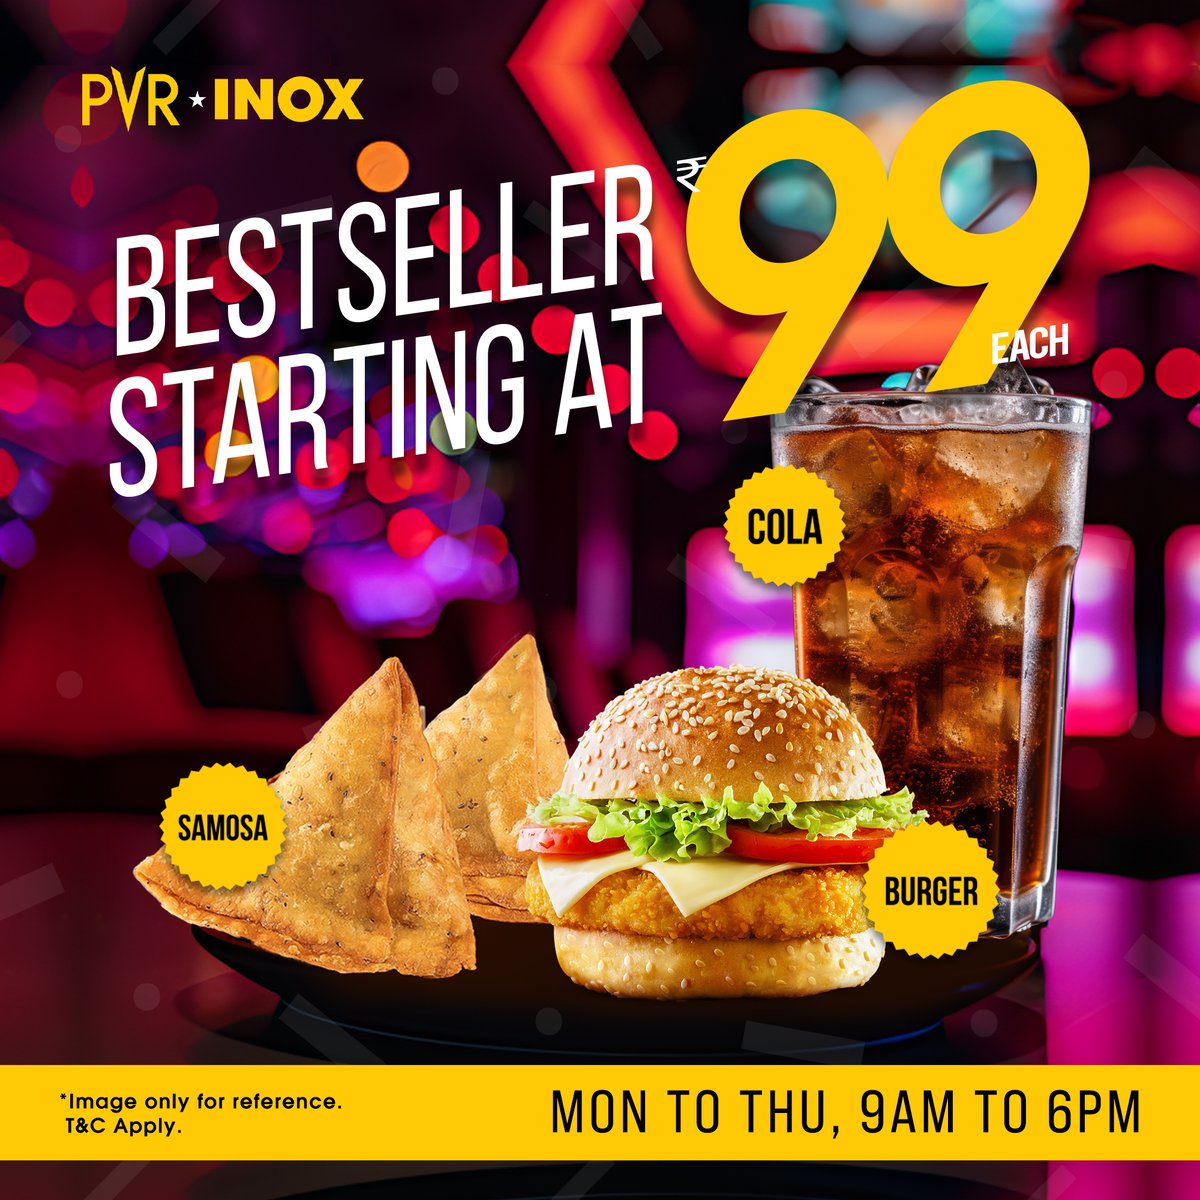 Indulge in the taste of our standout favorites, available at just ₹99! 🥤🍔 Treat yourself to our irresistible top sellers from Monday to Thursday, 9:00 a.m. to 6:00 p.m. 🤩
.
.
.
*T&Cs Apply 
#TastyDelights #PVRTreats #Samosa #Cola #Burger #Offer #Deals #Discount